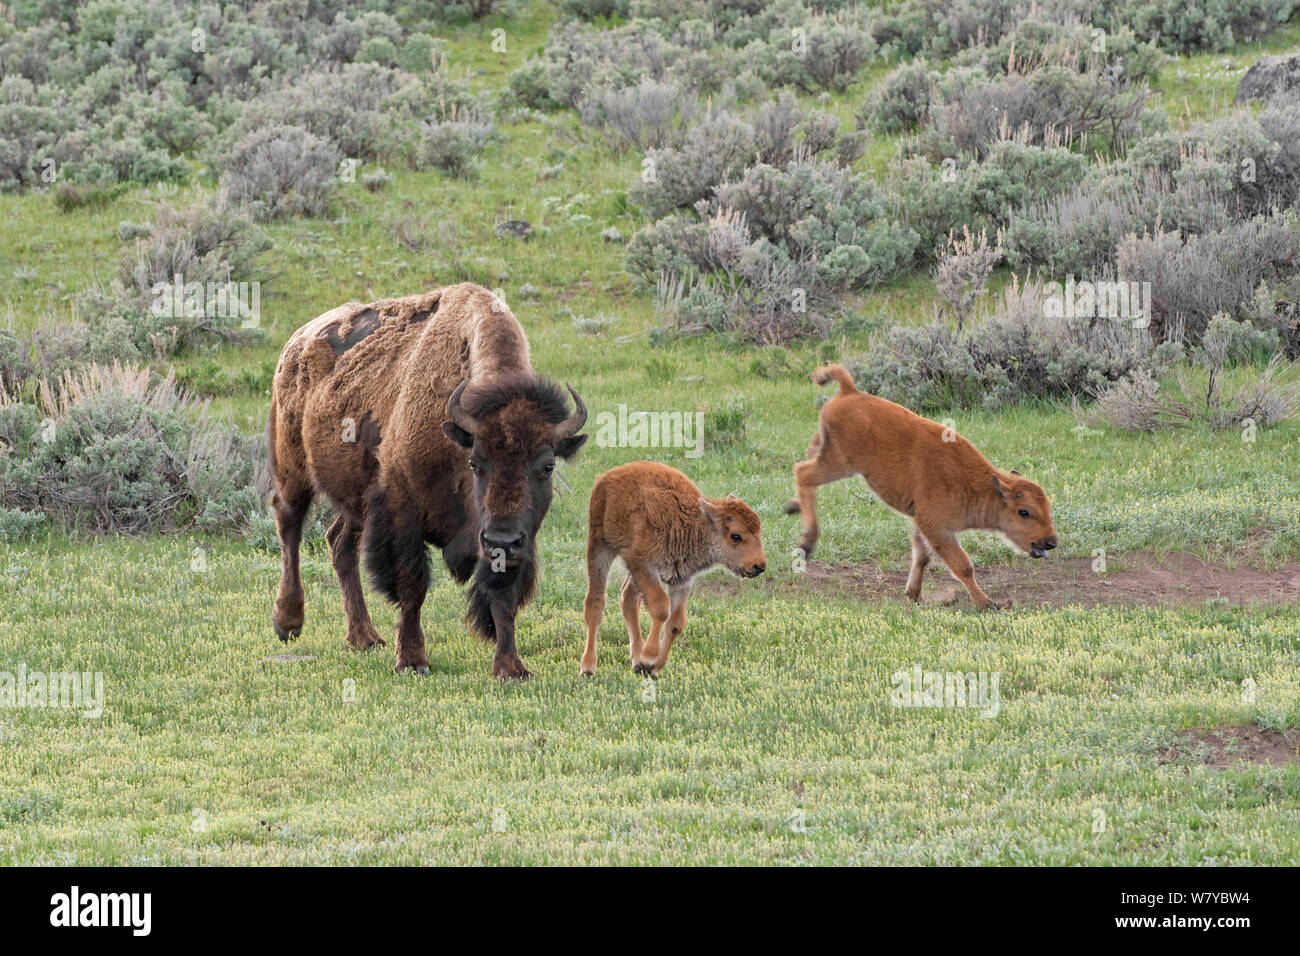 American Buffalo or Bison (Bison bison) mother with calves, Yellowstone National Park, Wyoming, USA, May Stock Photo